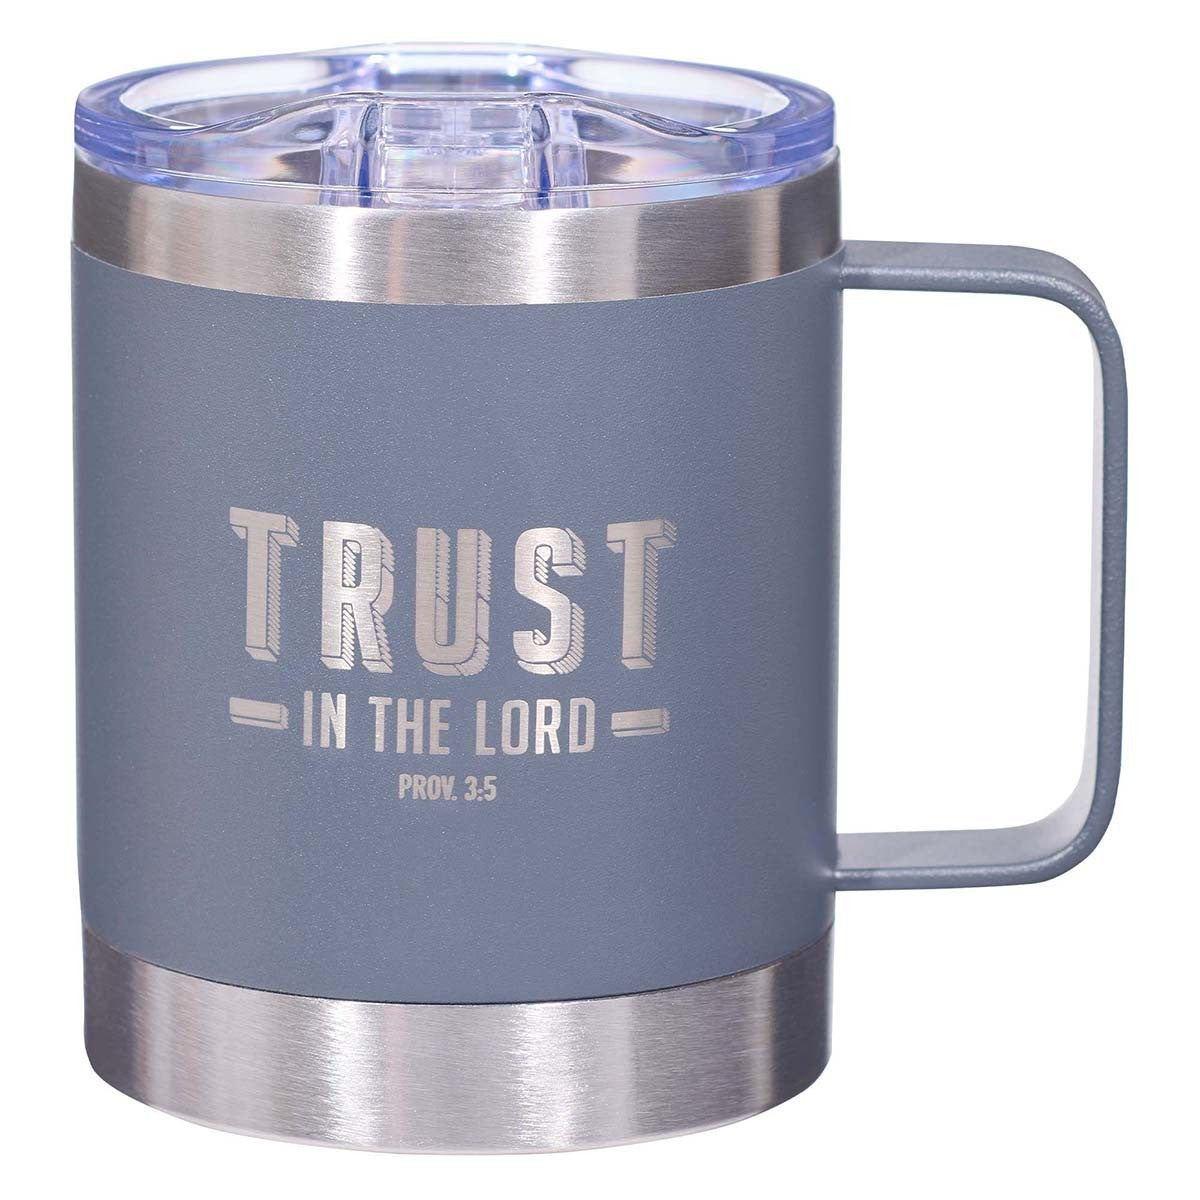 Trust the LORD Camp Style Stainless Steel Mug - Proverbs 3:5